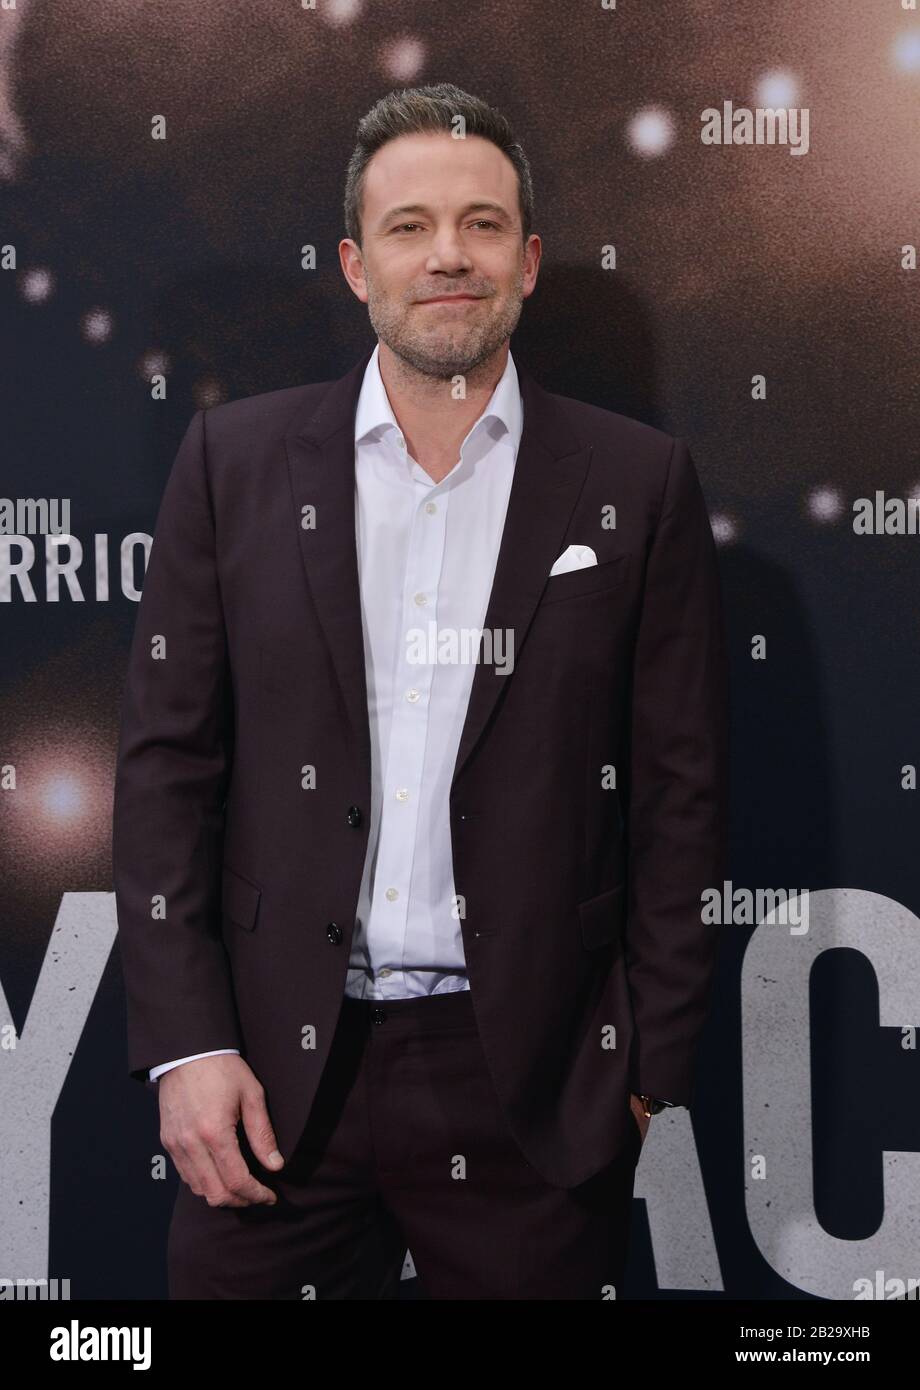 Los Angeles, USA. 01st Mar, 2020. Ben Affleck 021 attend the premiere of Warner Bros Pictures' ' The Way Back' at Regal LA Live on March 01, 2020 in Los Angeles, California. Credit: Tsuni/USA/Alamy Live News Stock Photo